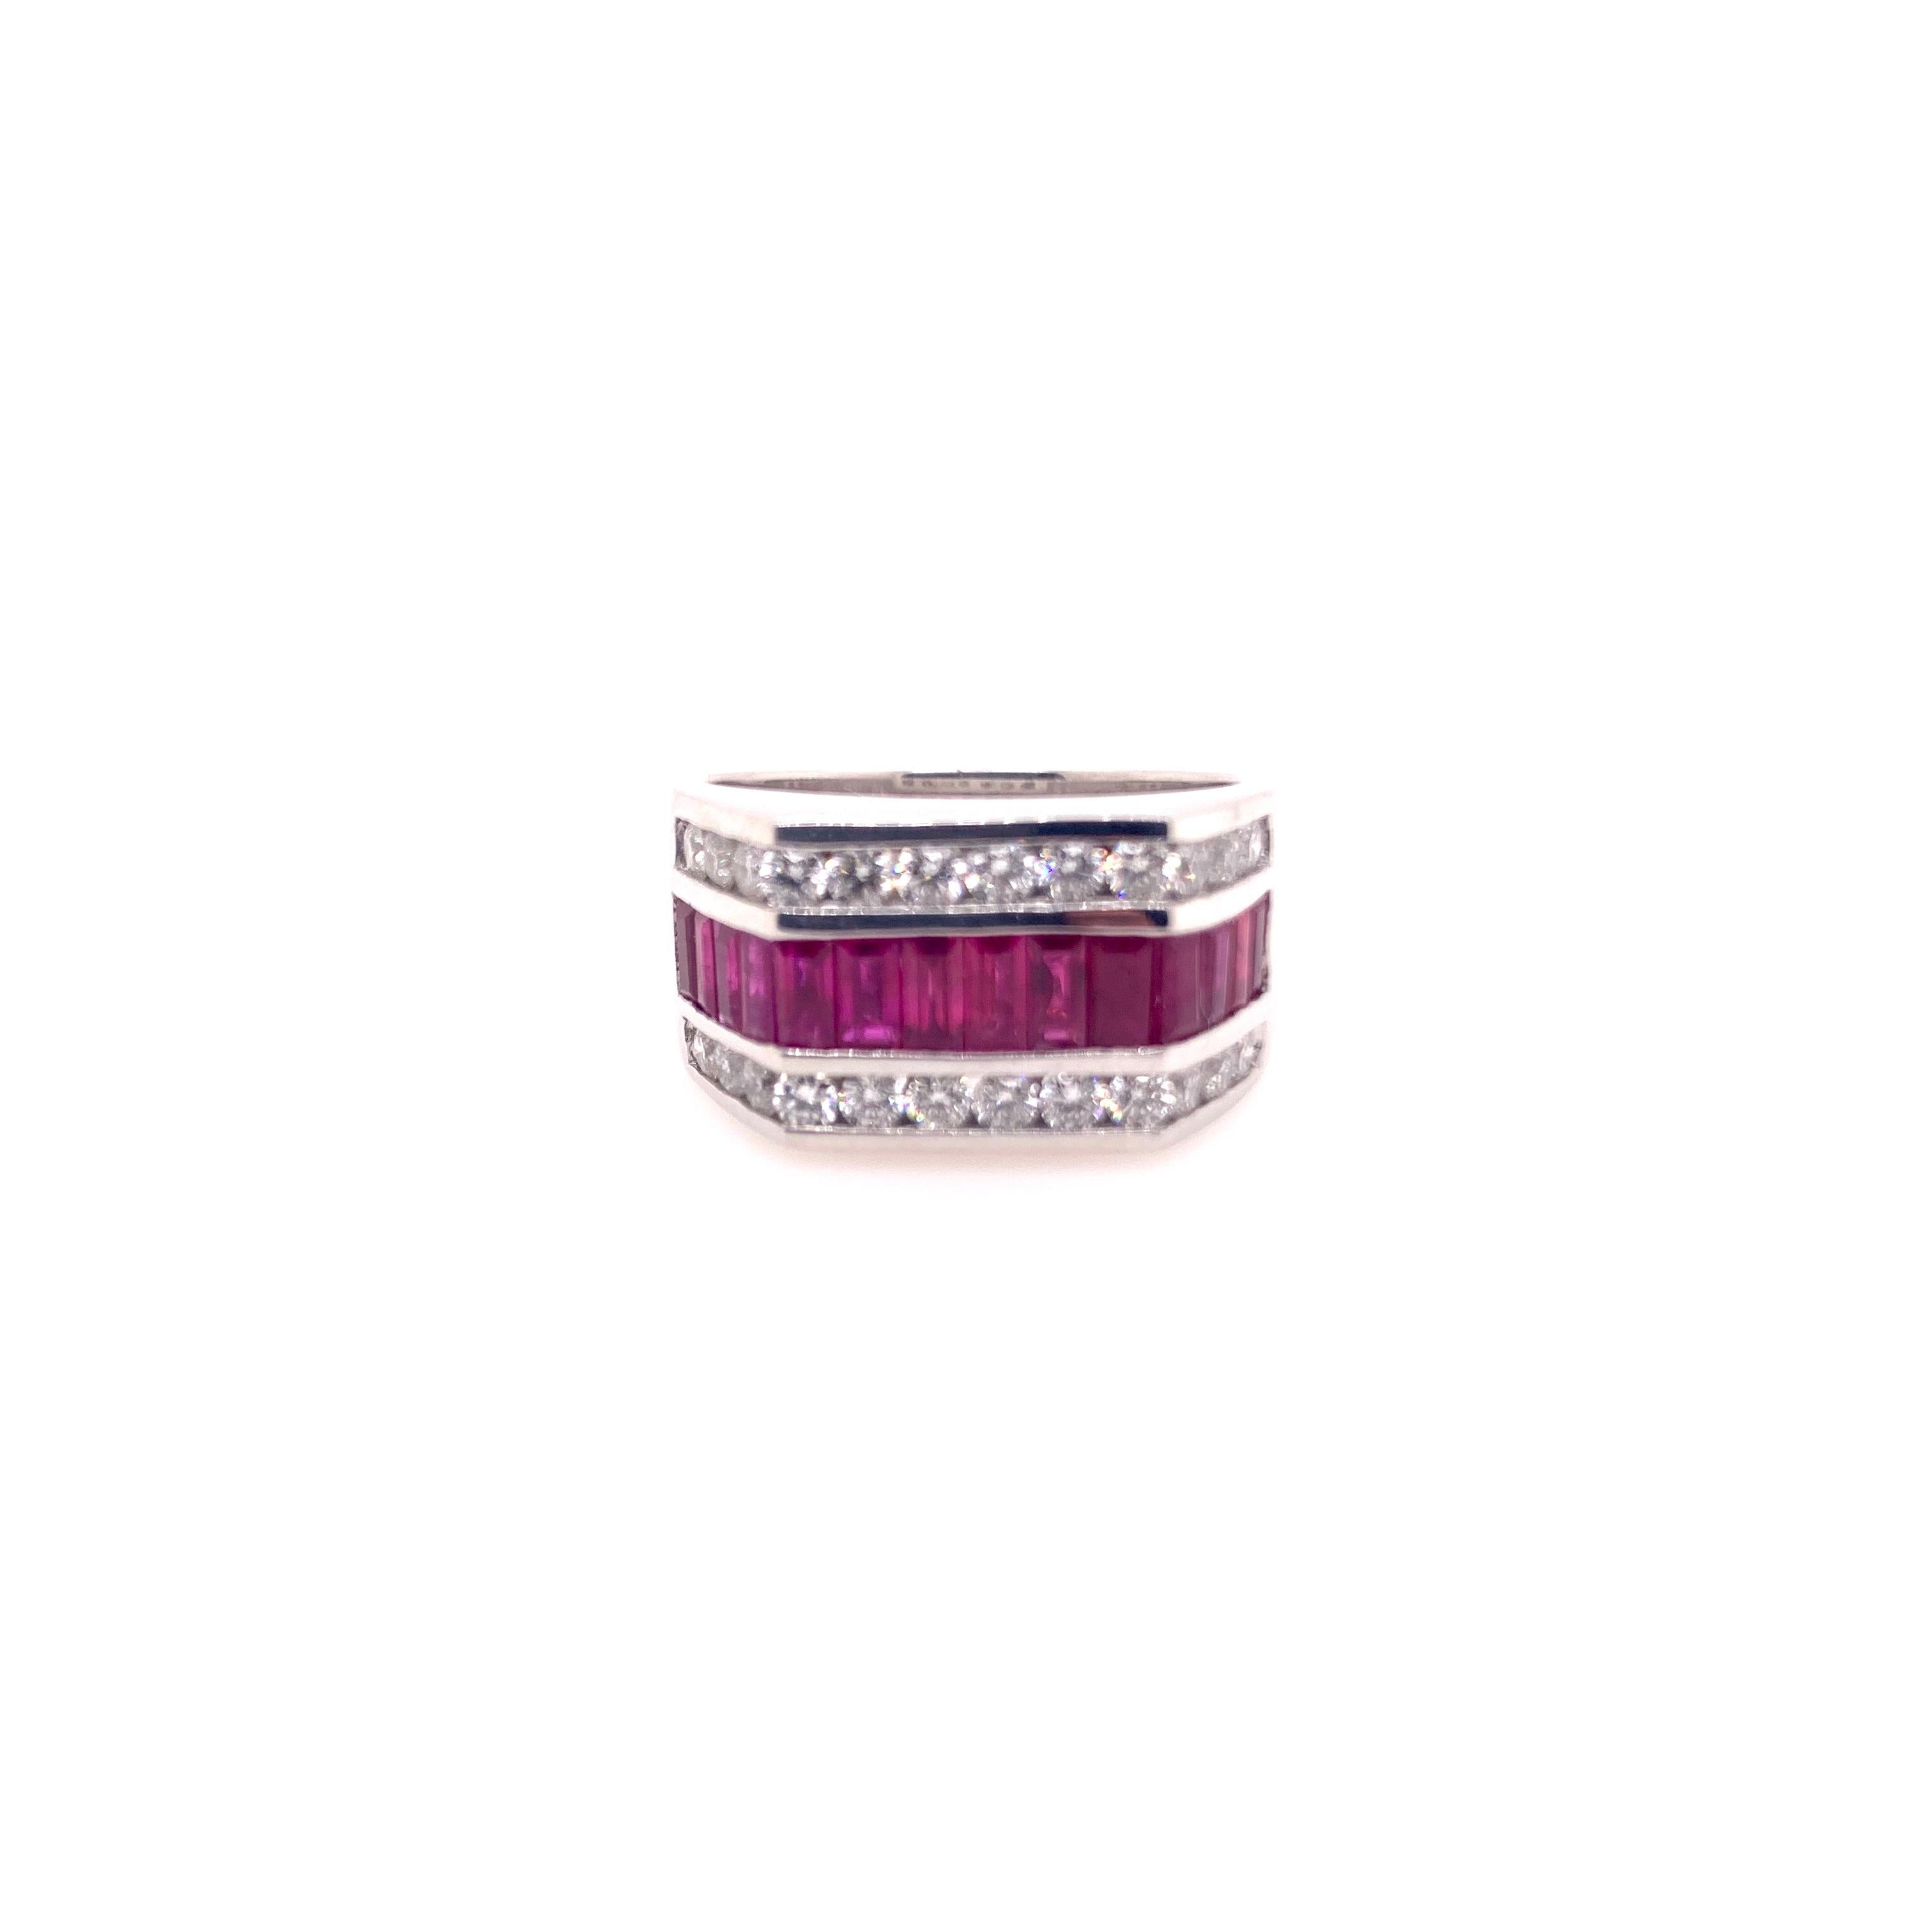 One of our best sellers, this J.Ray style band is easy to wear formally as well as casually.  The ruby baguettes are channeled set along with the round brilliant diamonds on both sides of the rubies.  The sharp angles give it a clean, contemporary